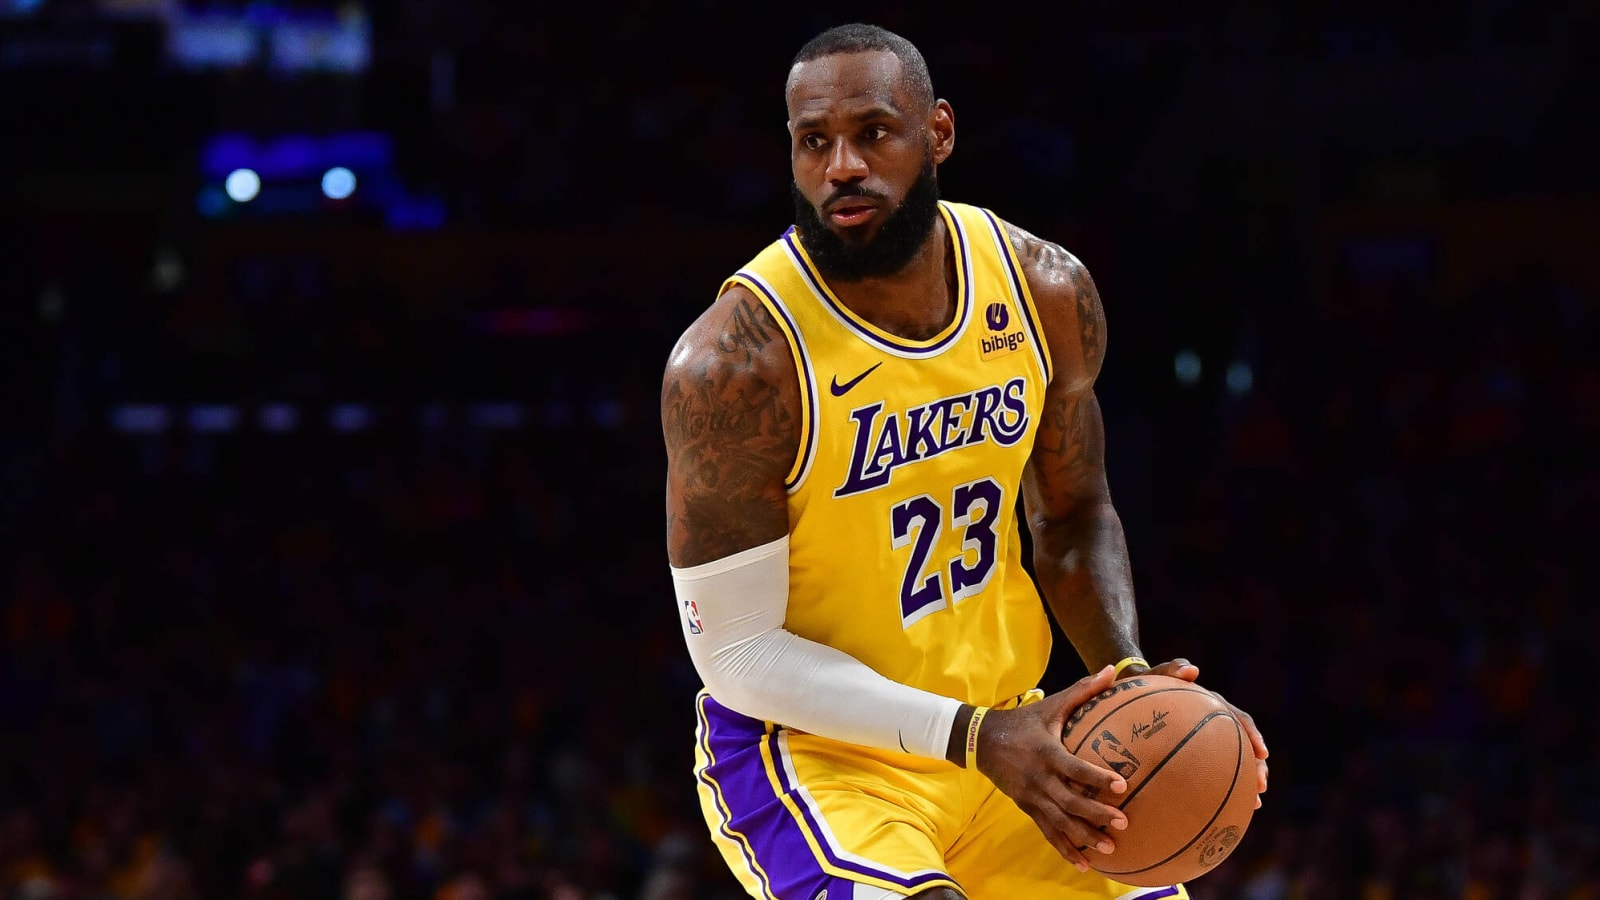 Lakers’ LeBron James Reportedly Undecided on Player Option